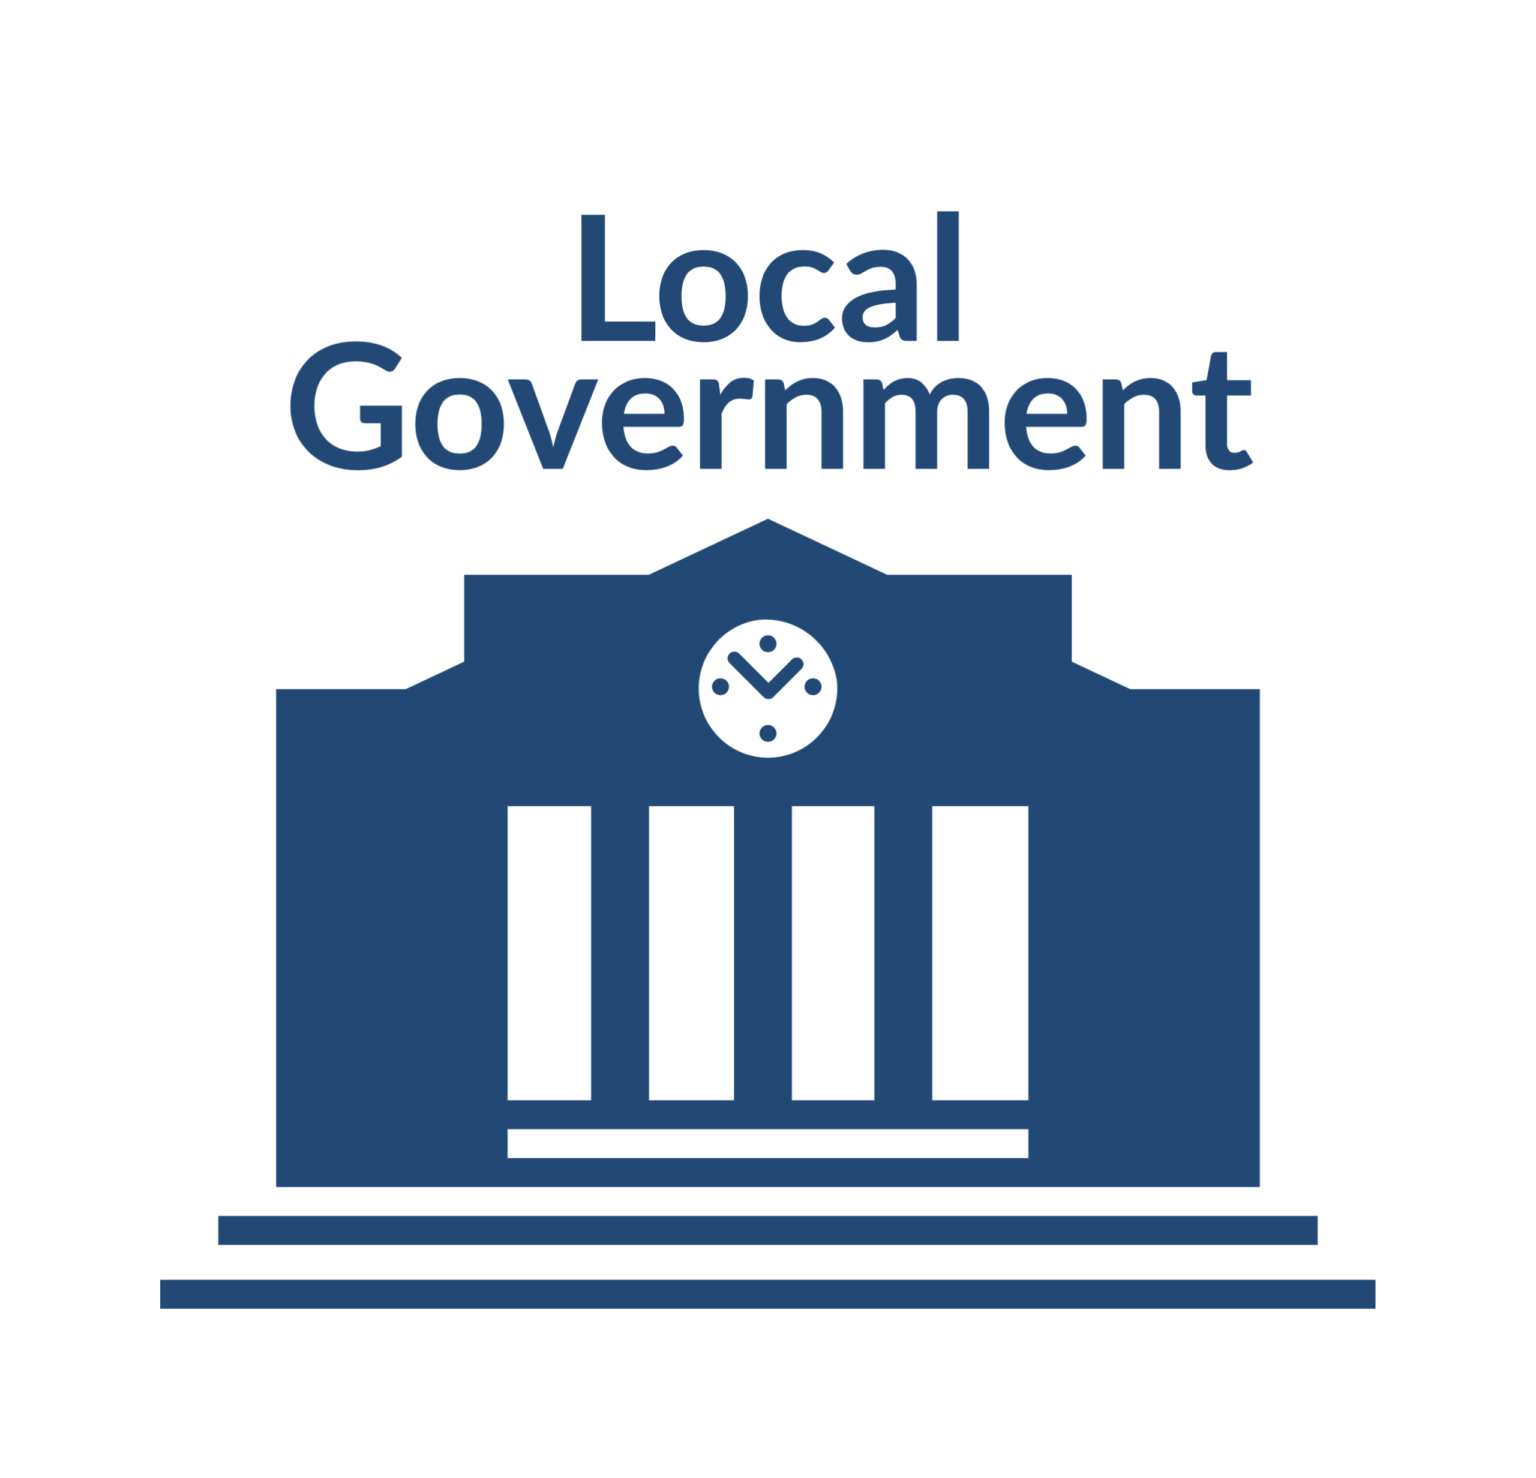 Local Government - Research Matters